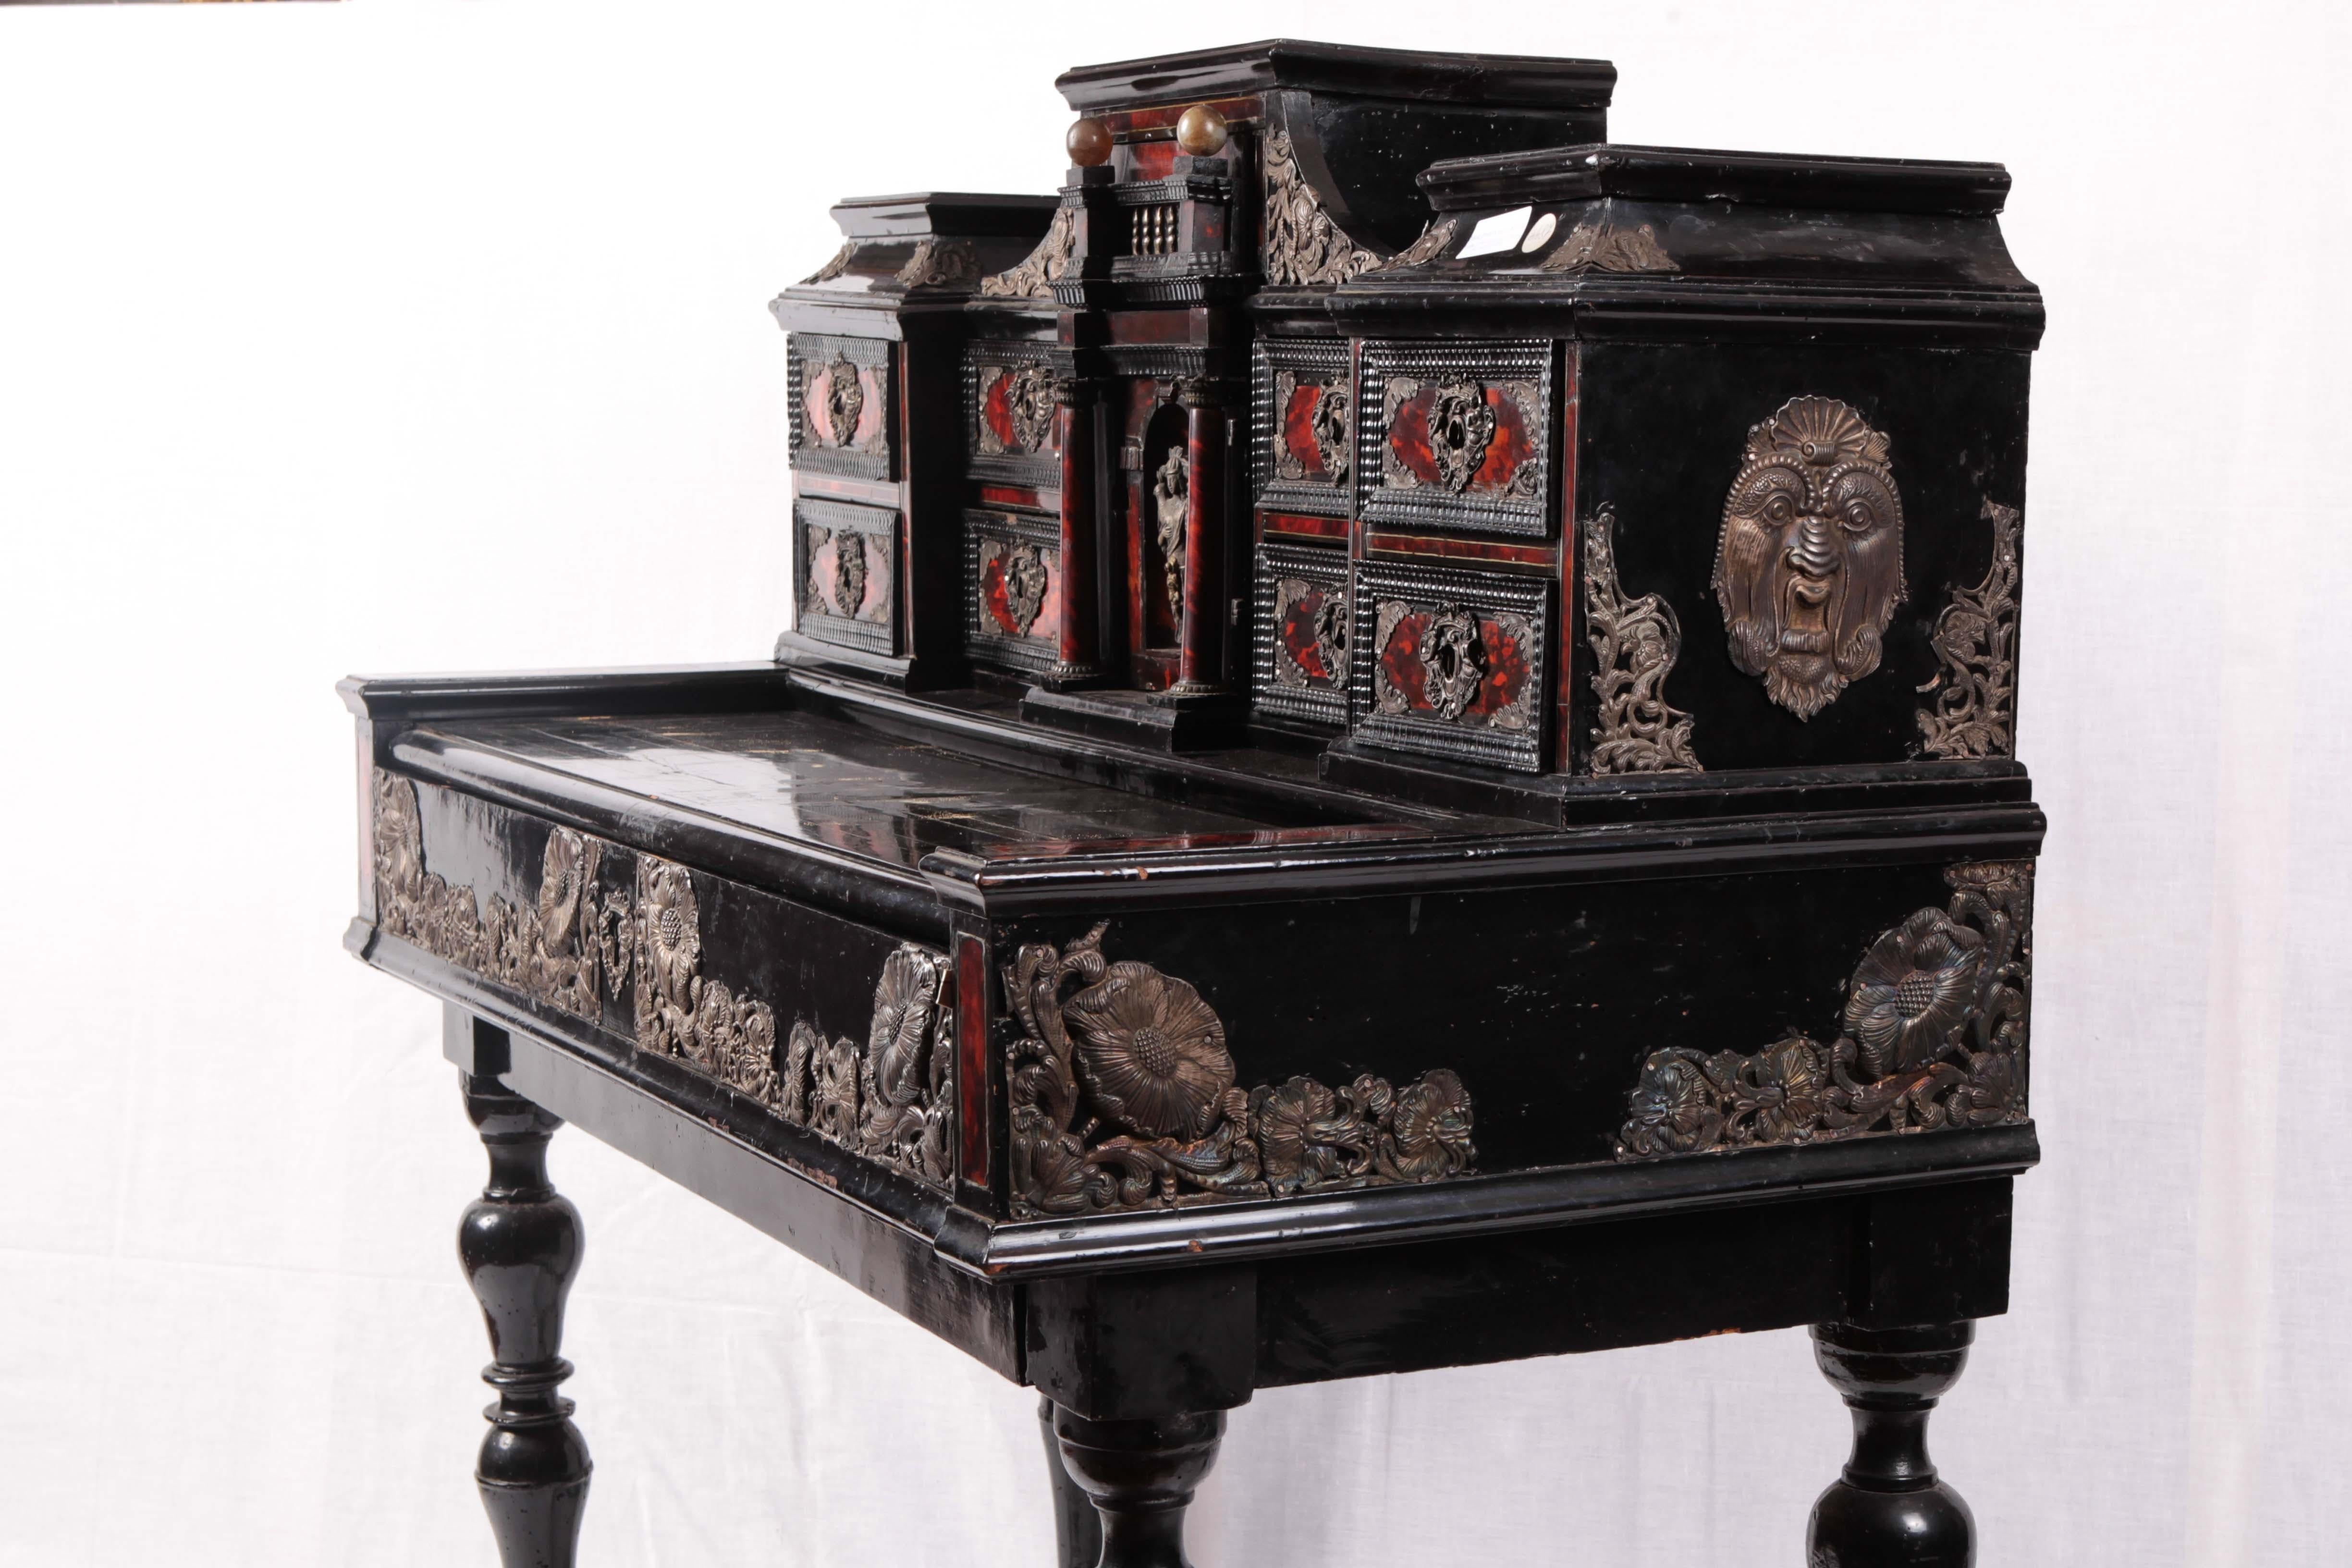 Writing desk in ebony embellished with tortoiseshell inserts and silver finishes. Drawers along with a sliding and folding top.
Origin: Southern Italy, Sicily
Period: mid-1700s
Dimensions: 108 x 54 x 124 cm.
 